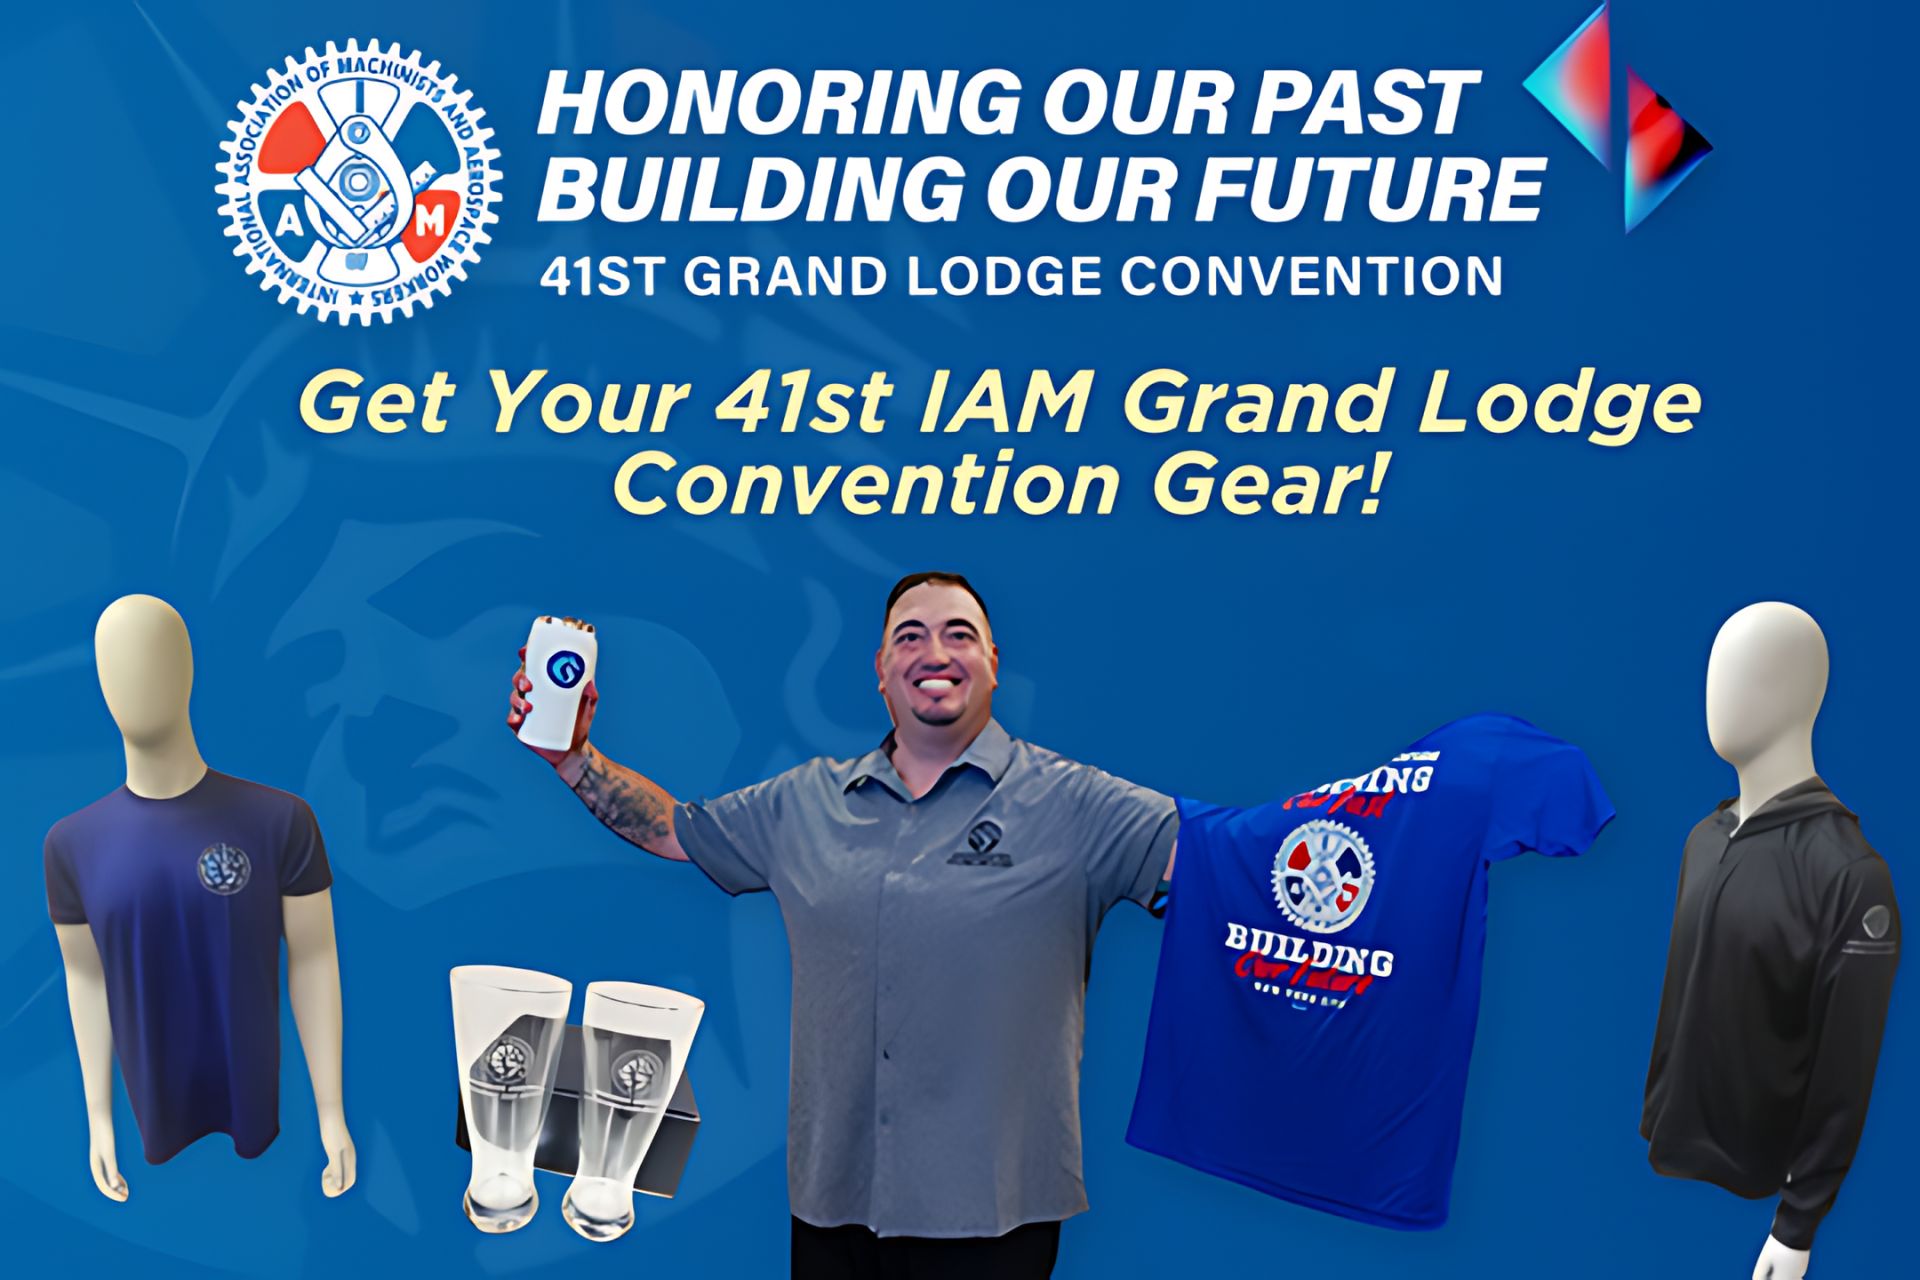 Get Your 41st IAM Grand Lodge Convention Gear!